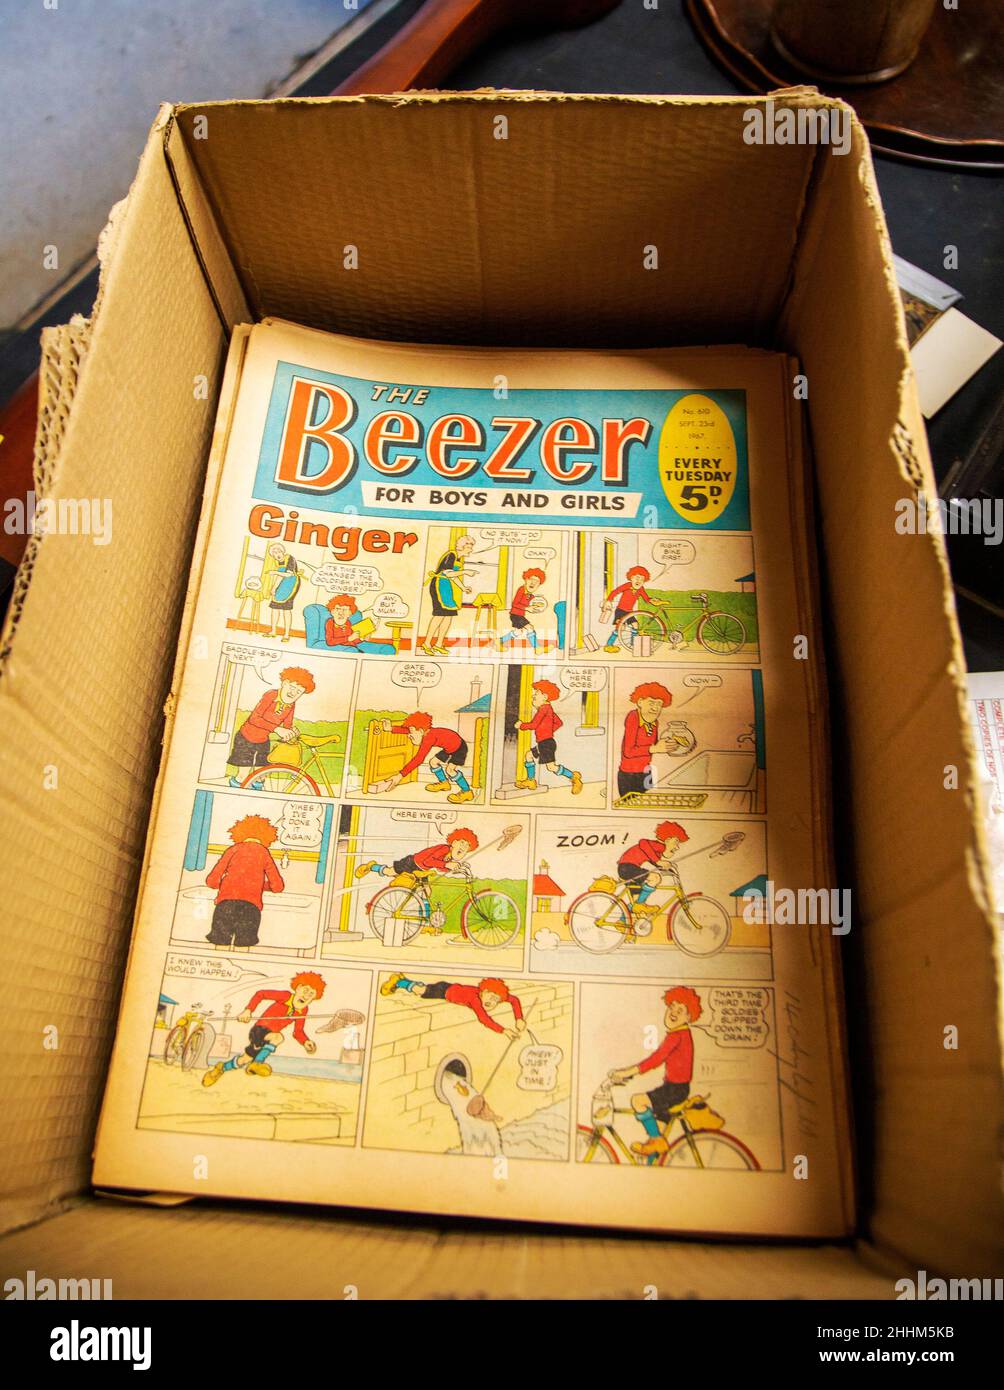 The Beezer weekly cartoon comic for Boys and Girls, published every week by D. C. Thomson, UK 1967 edition on display Stock Photo